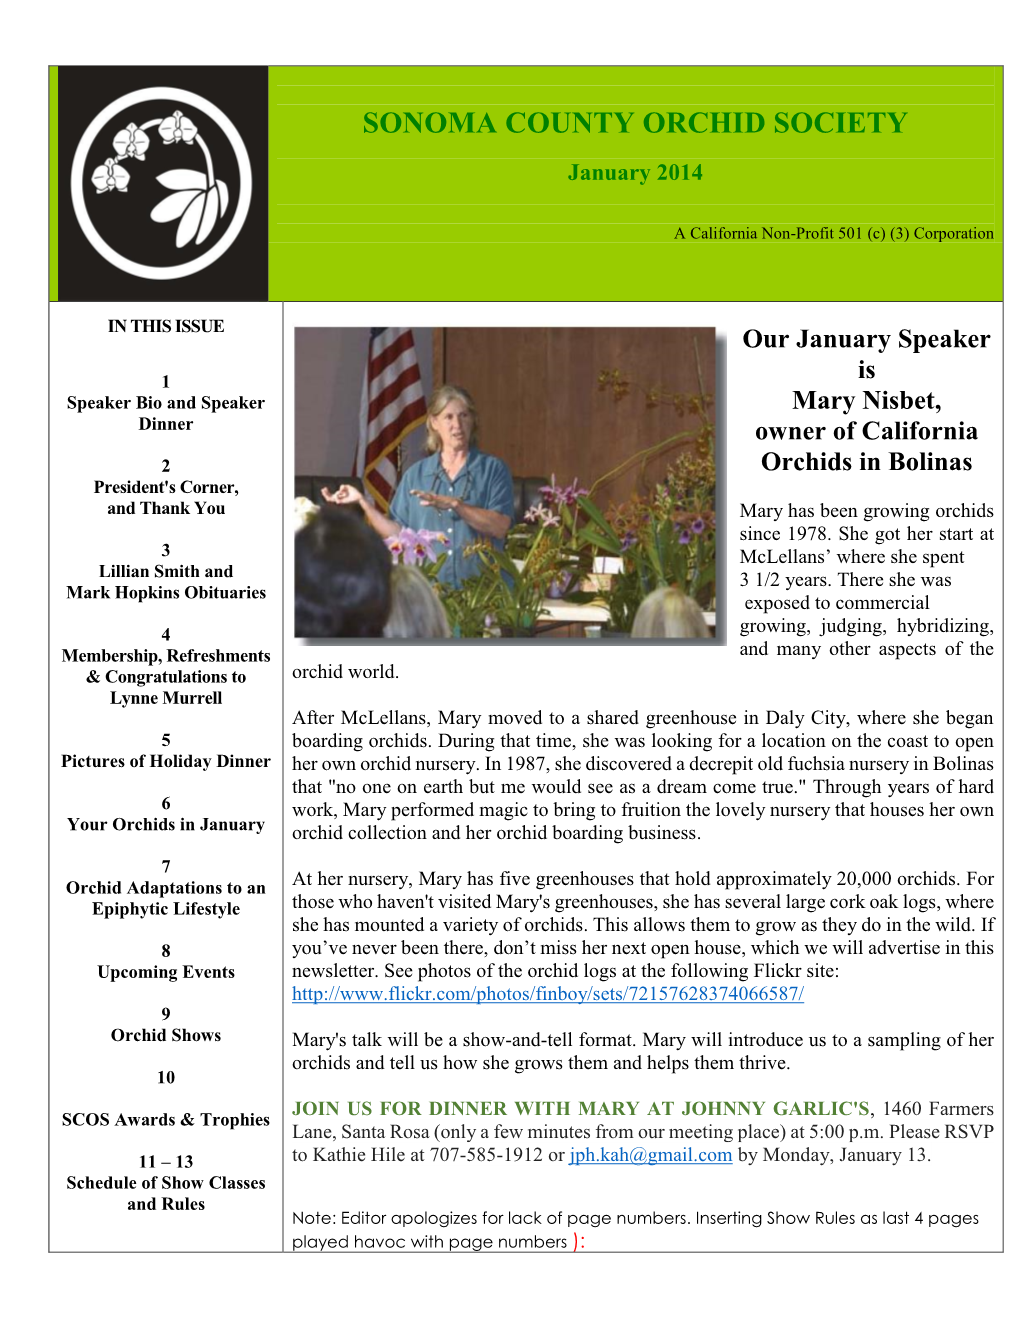 Our January Speaker Is Mary Nisbet, Owner of California Orchids in Bolinas